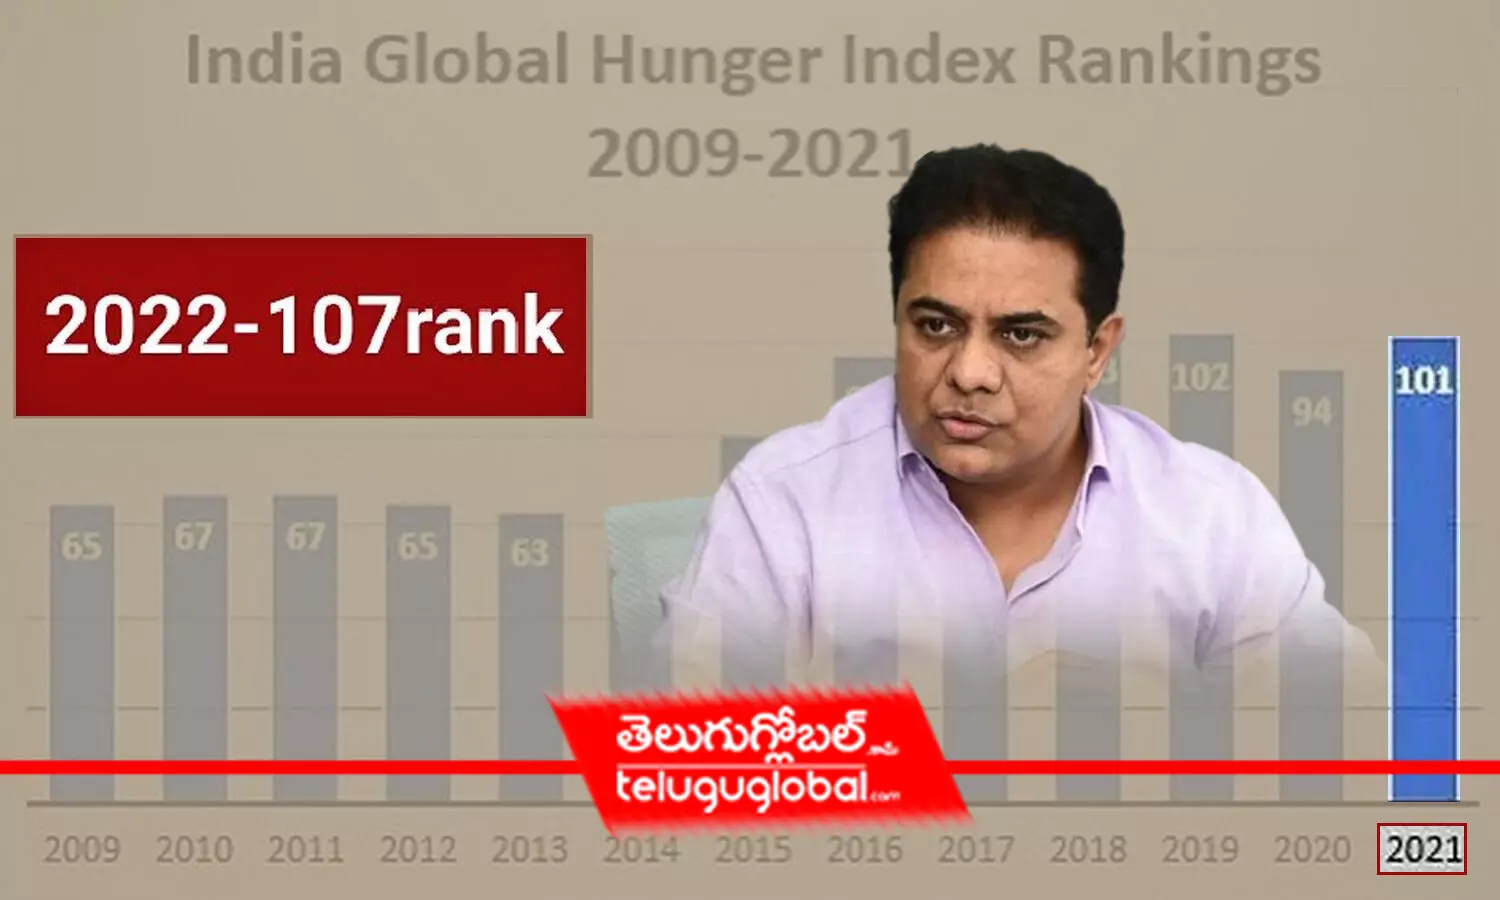 India slips from 101 to 107 Rank in Global Hunger Index, KTR posts a sarcastic tweet